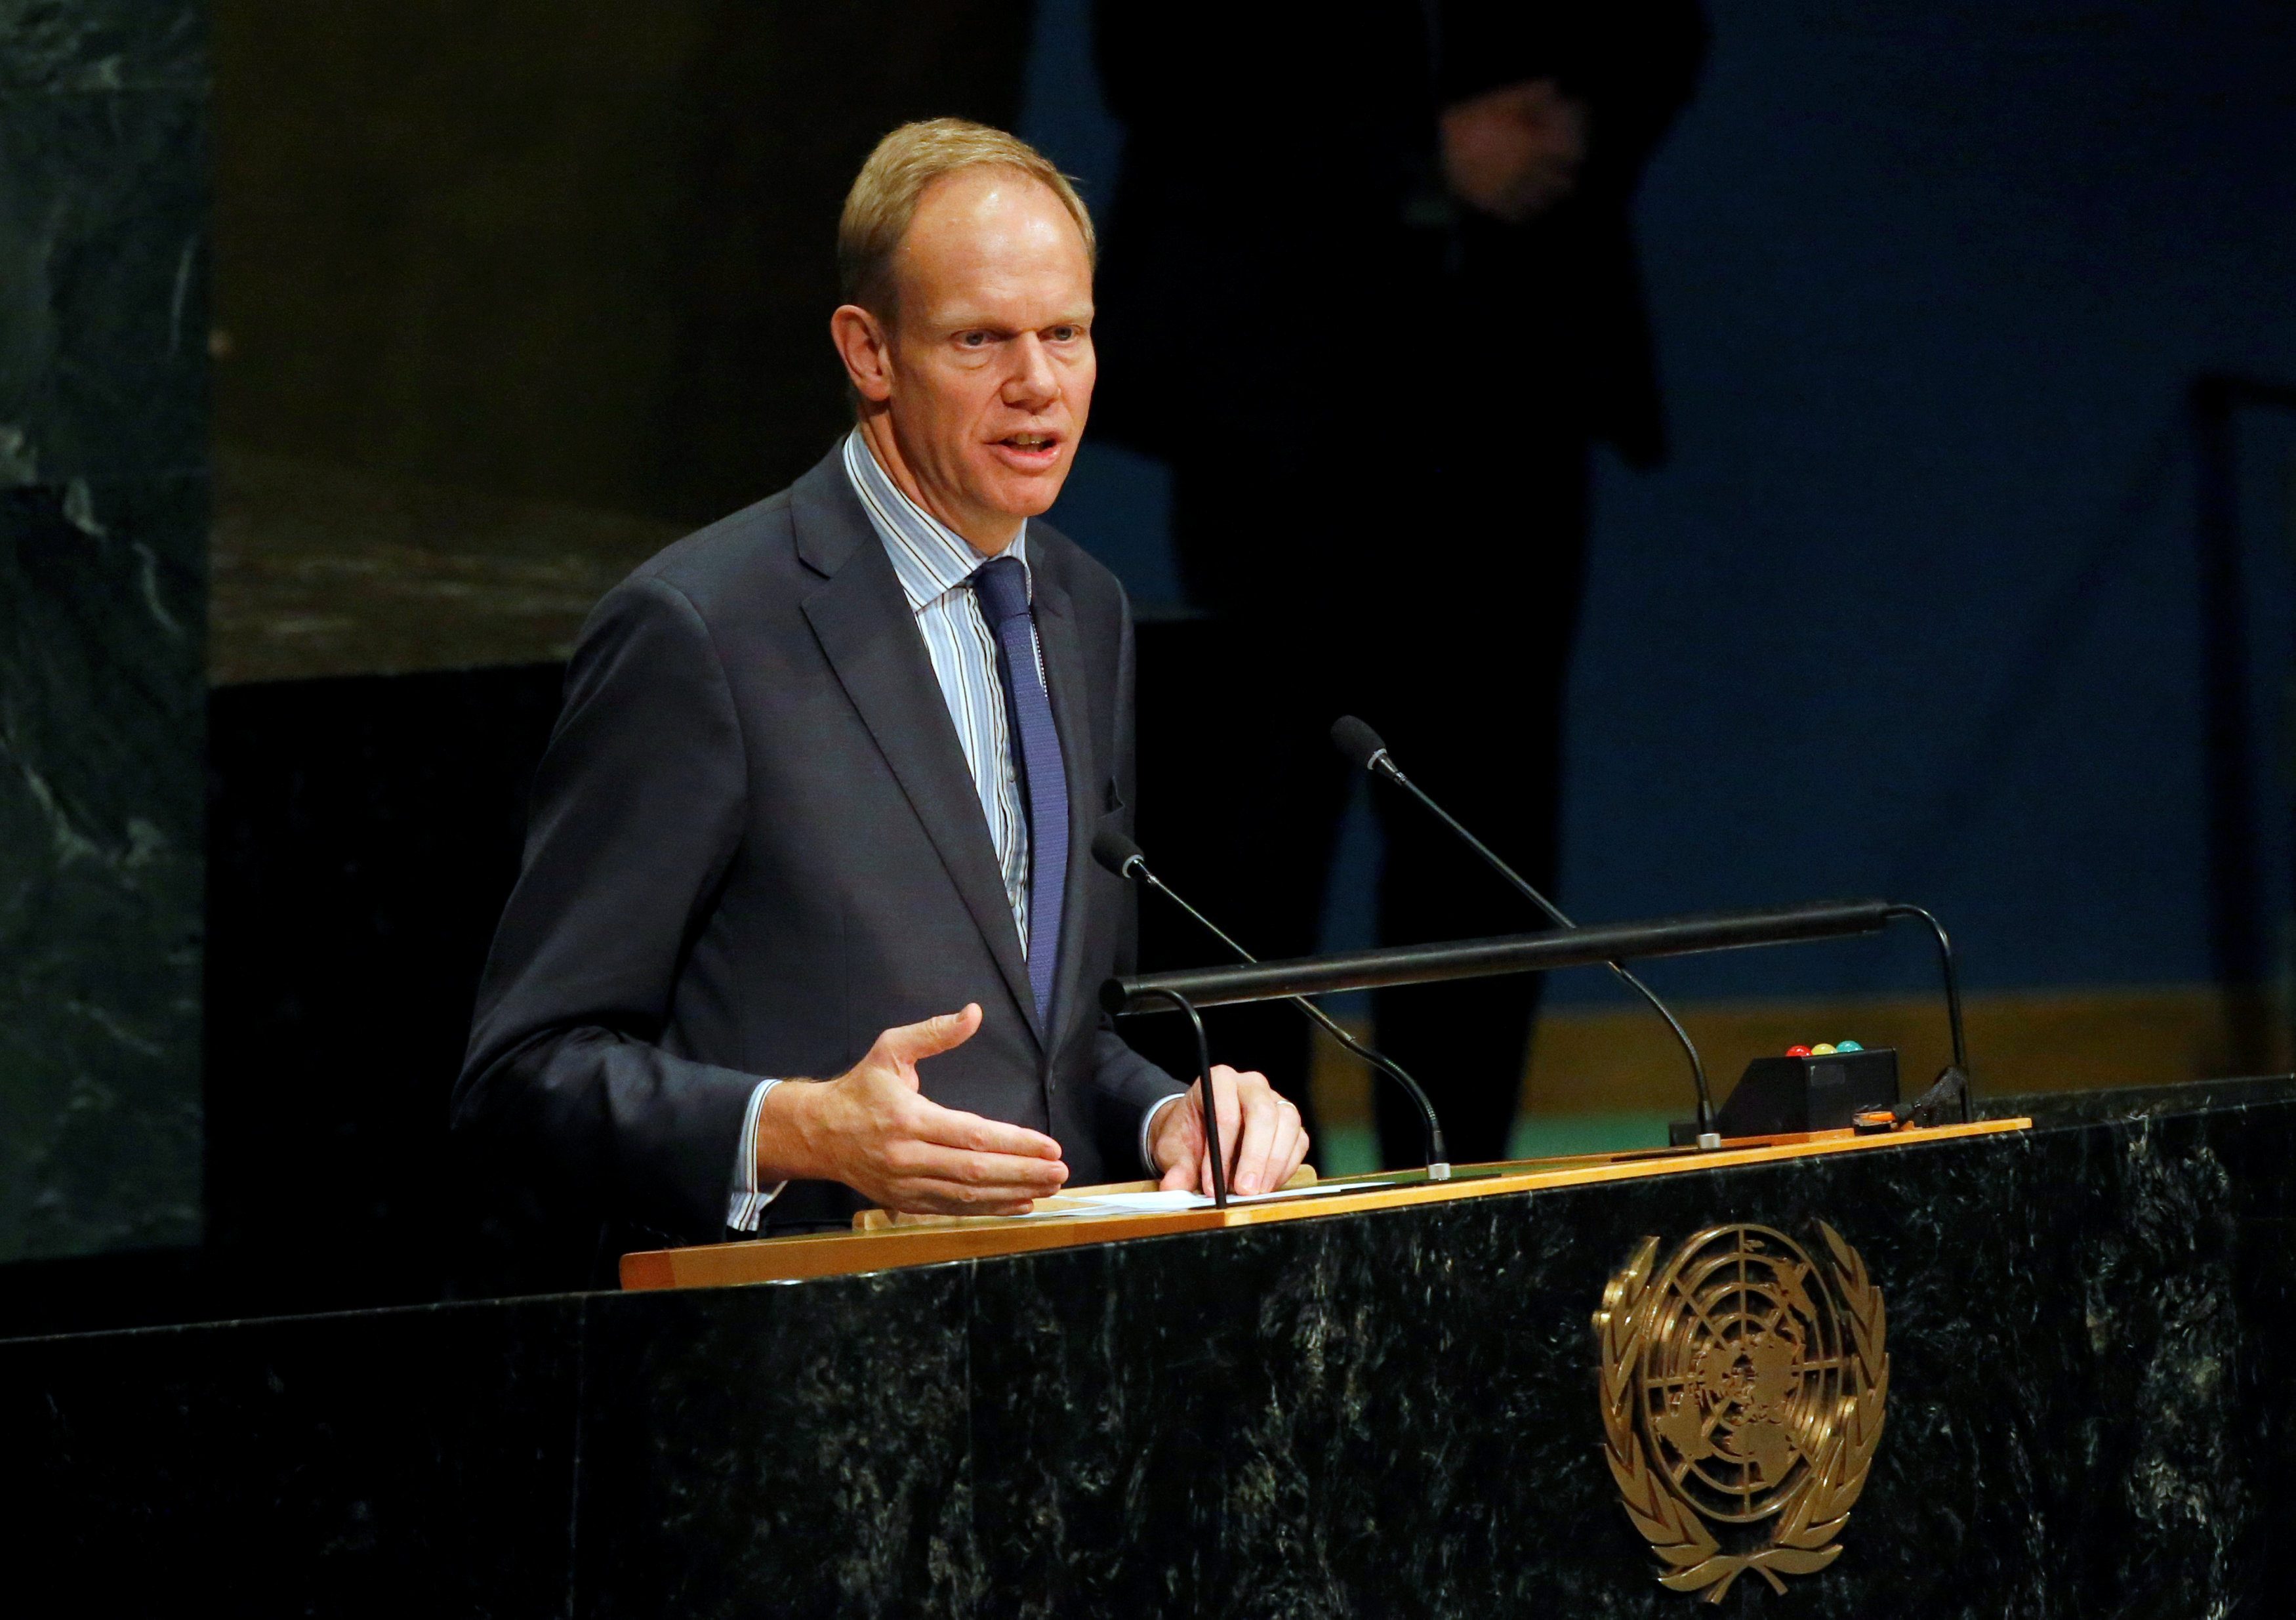 British Ambassador to the United Nations Matthew Rycroft speaks during a tribute to the late King of Thailand Bhumibol Adulyadej in the General Assembly at United Nations headquarters in New York, October 28, 2016. REUTERS/Brendan McDermid